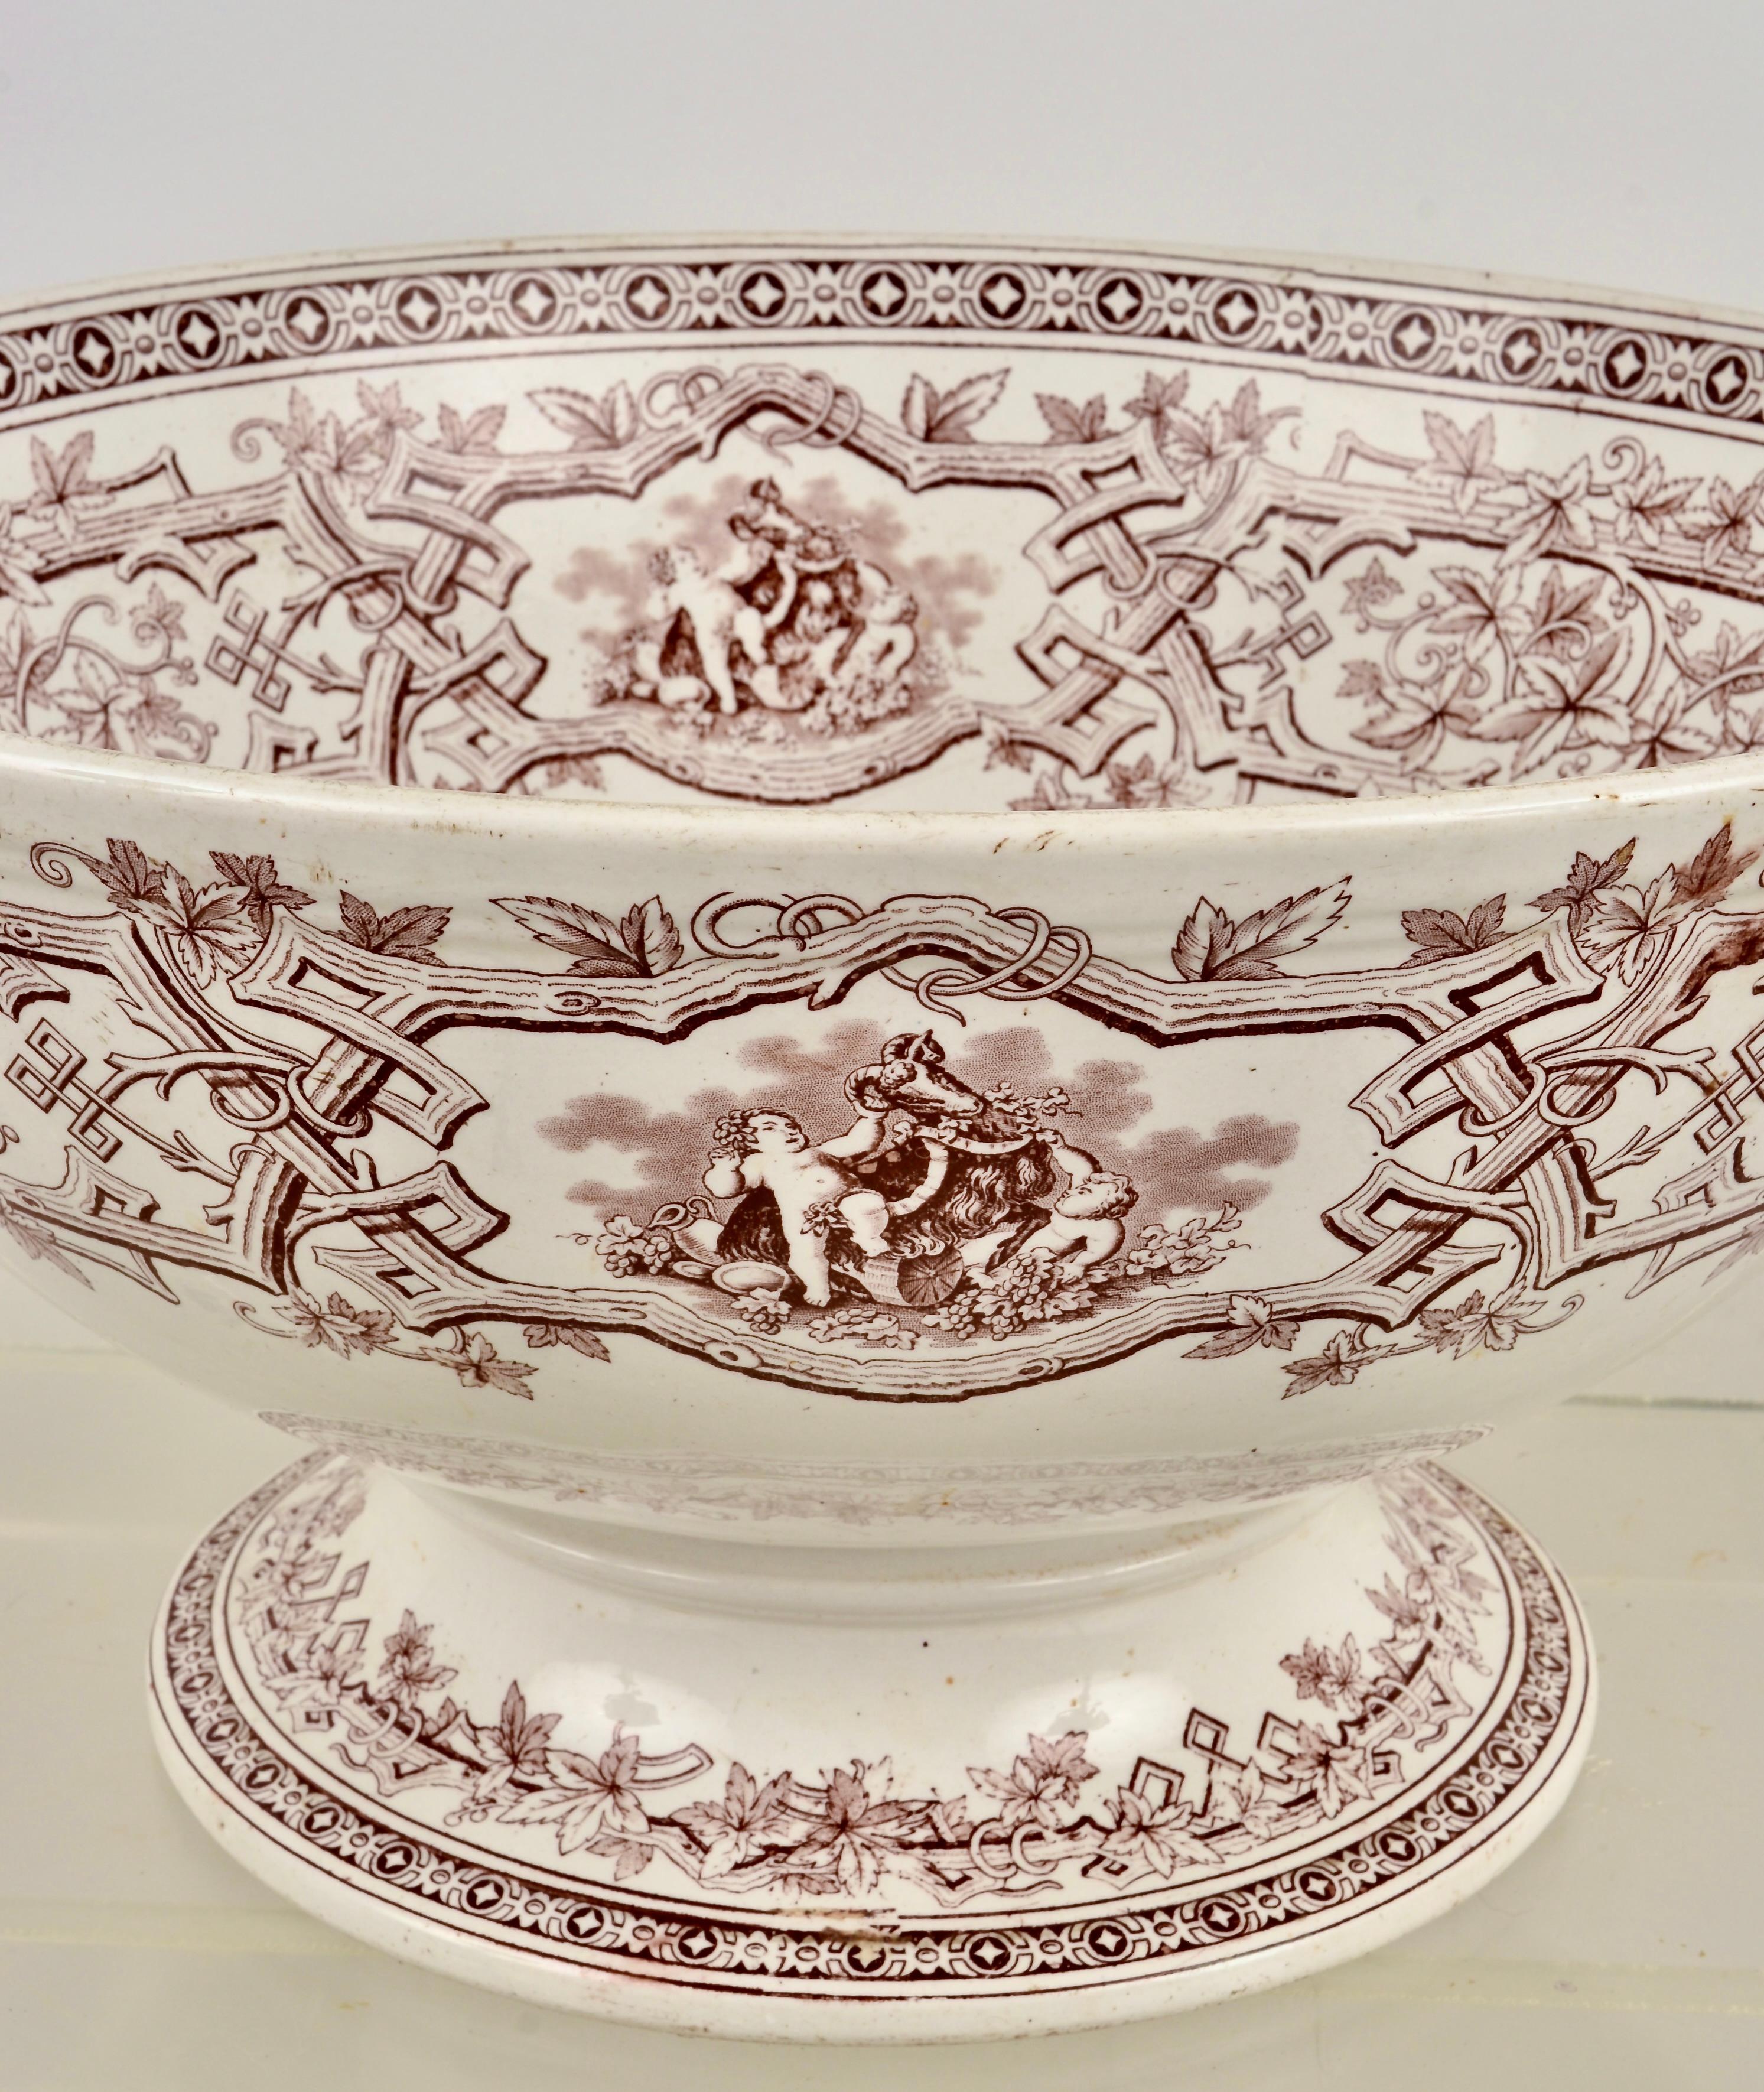 !9th C English Transferware Punch Bowl by Furnival For Sale 1